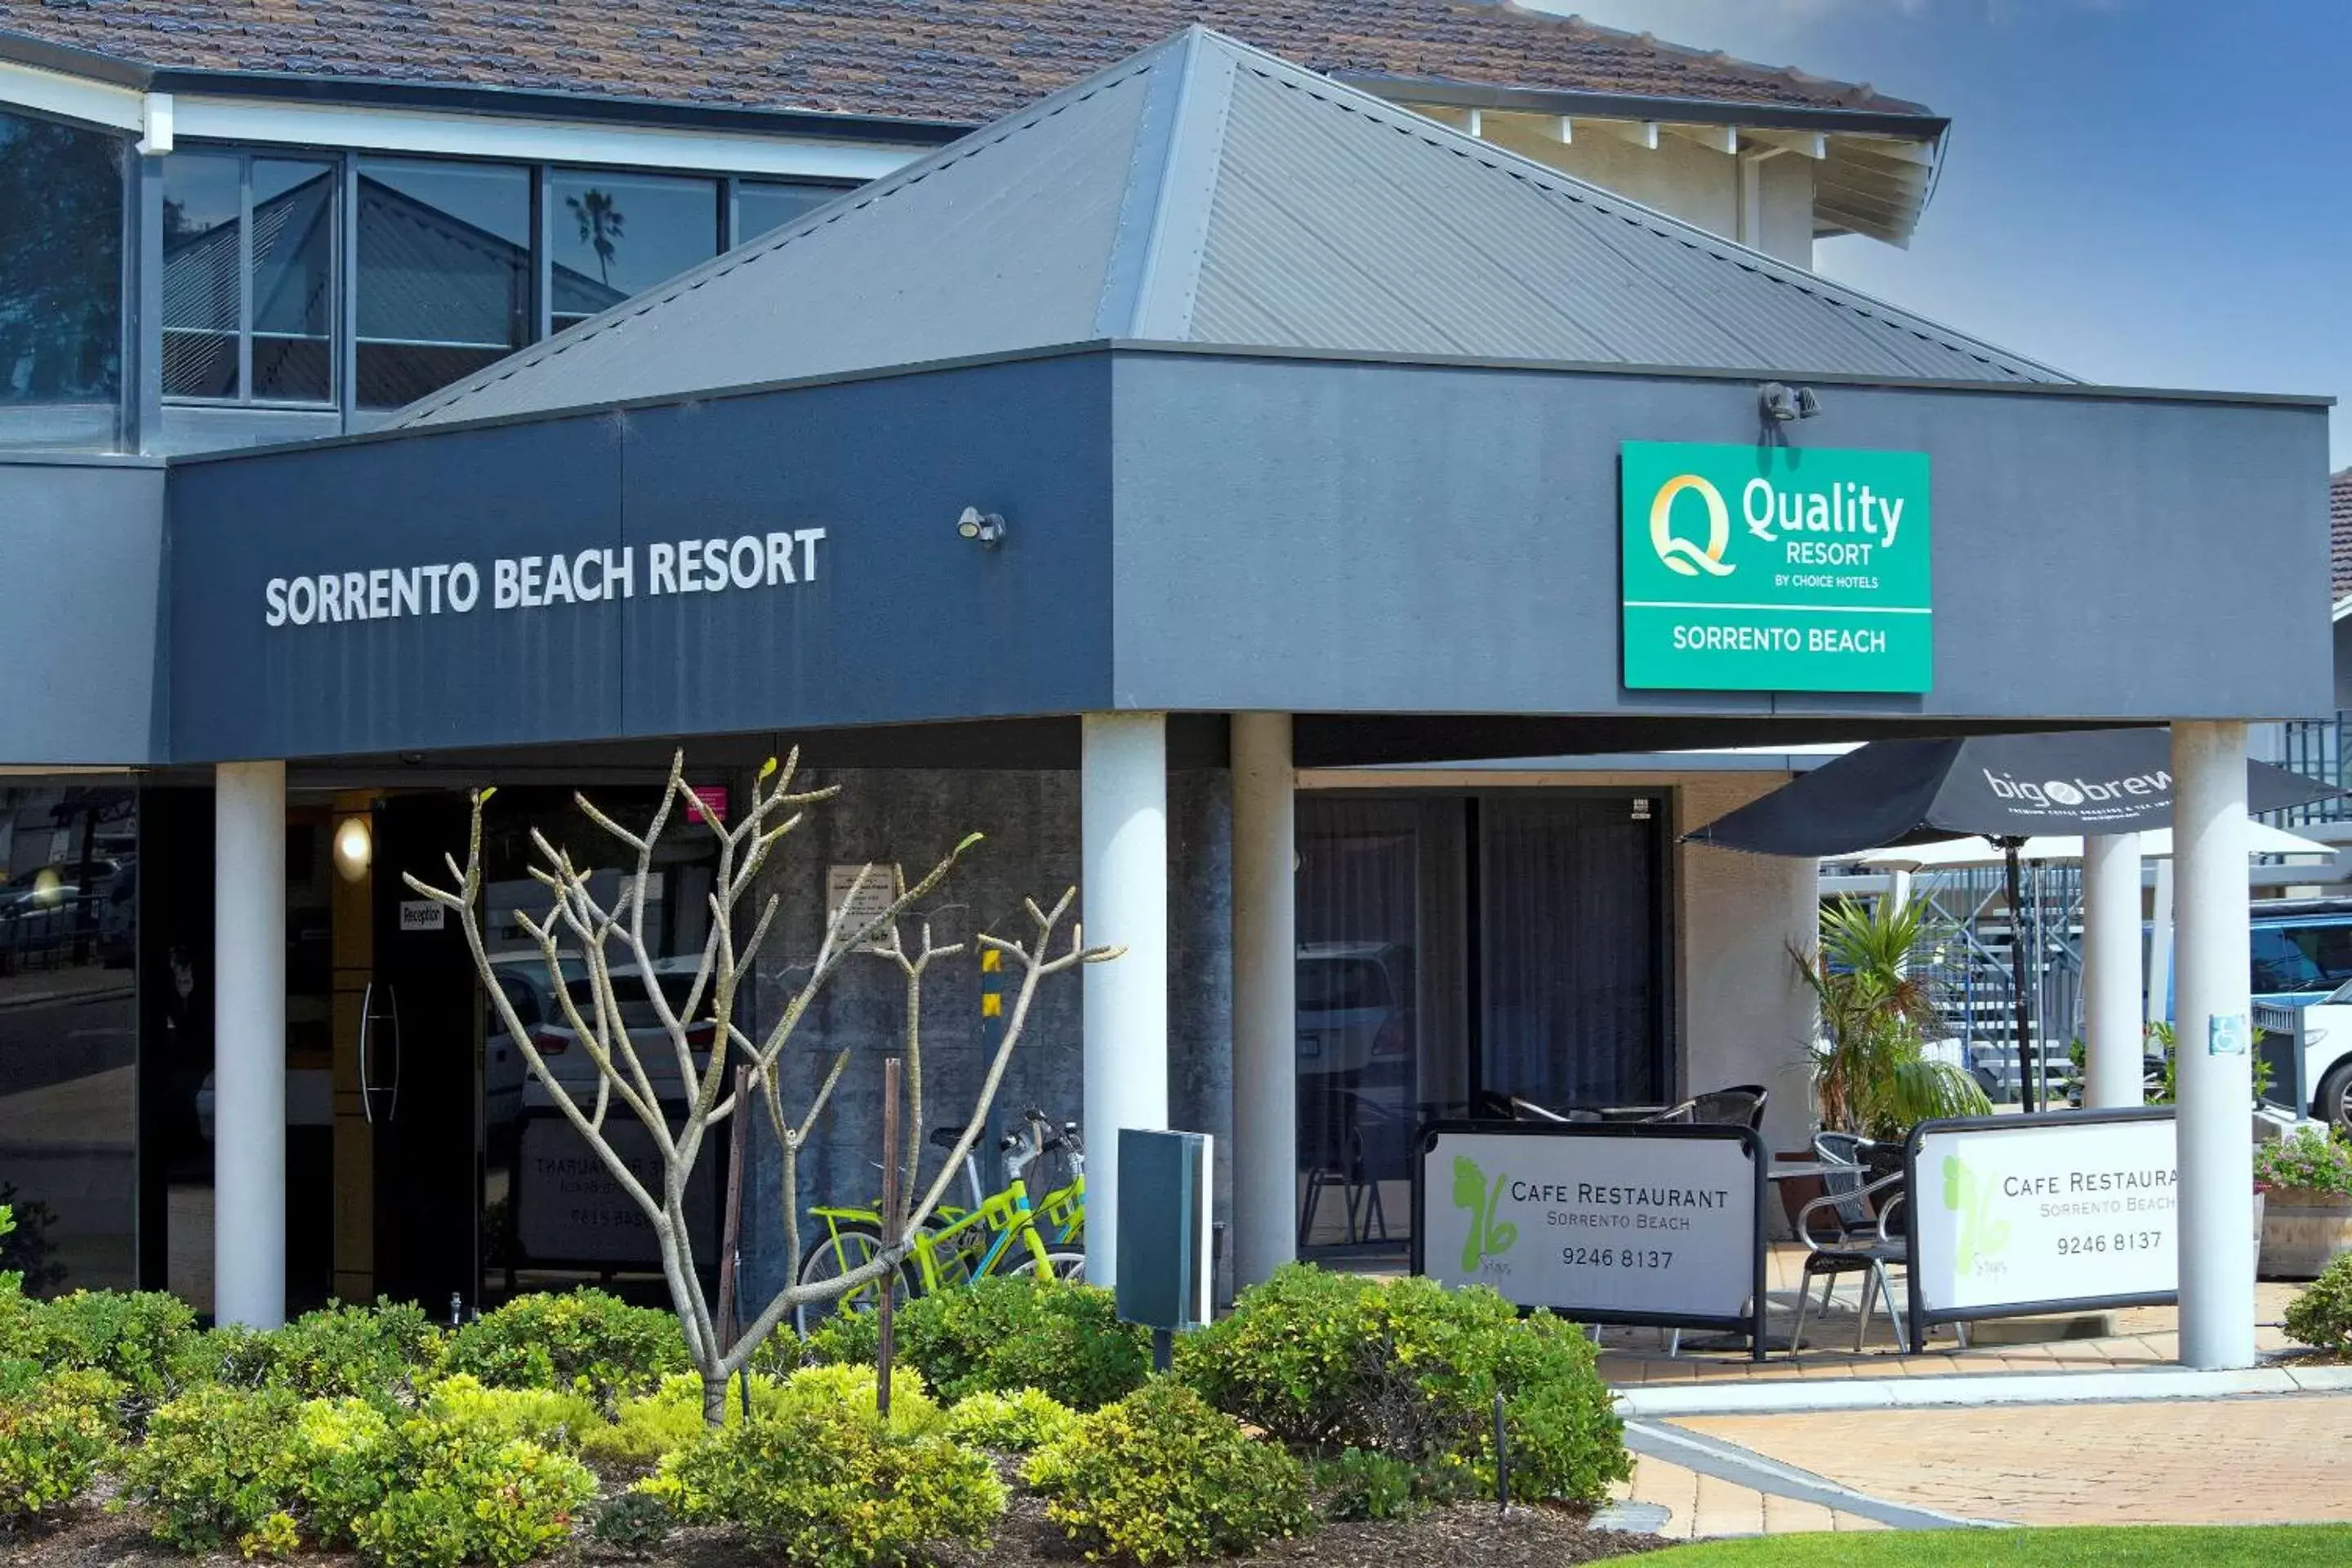 Property Building in Quality Resort Sorrento Beach